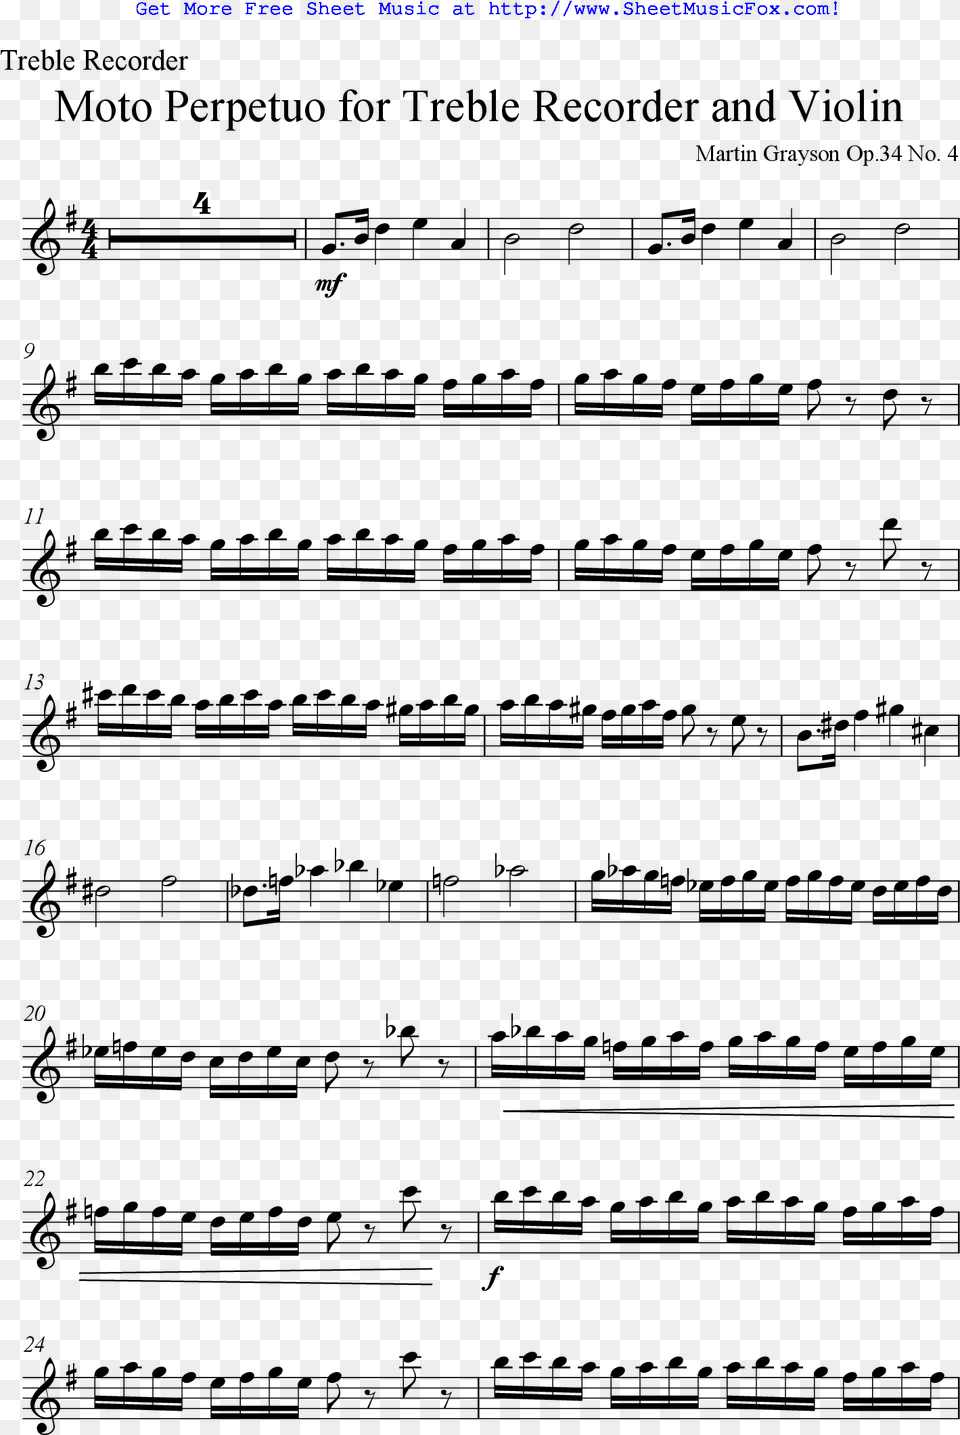 Free Sheet Music For Duos For Treble Recorder And Violin Into The Storm Sheet Music Violin, Text Png Image